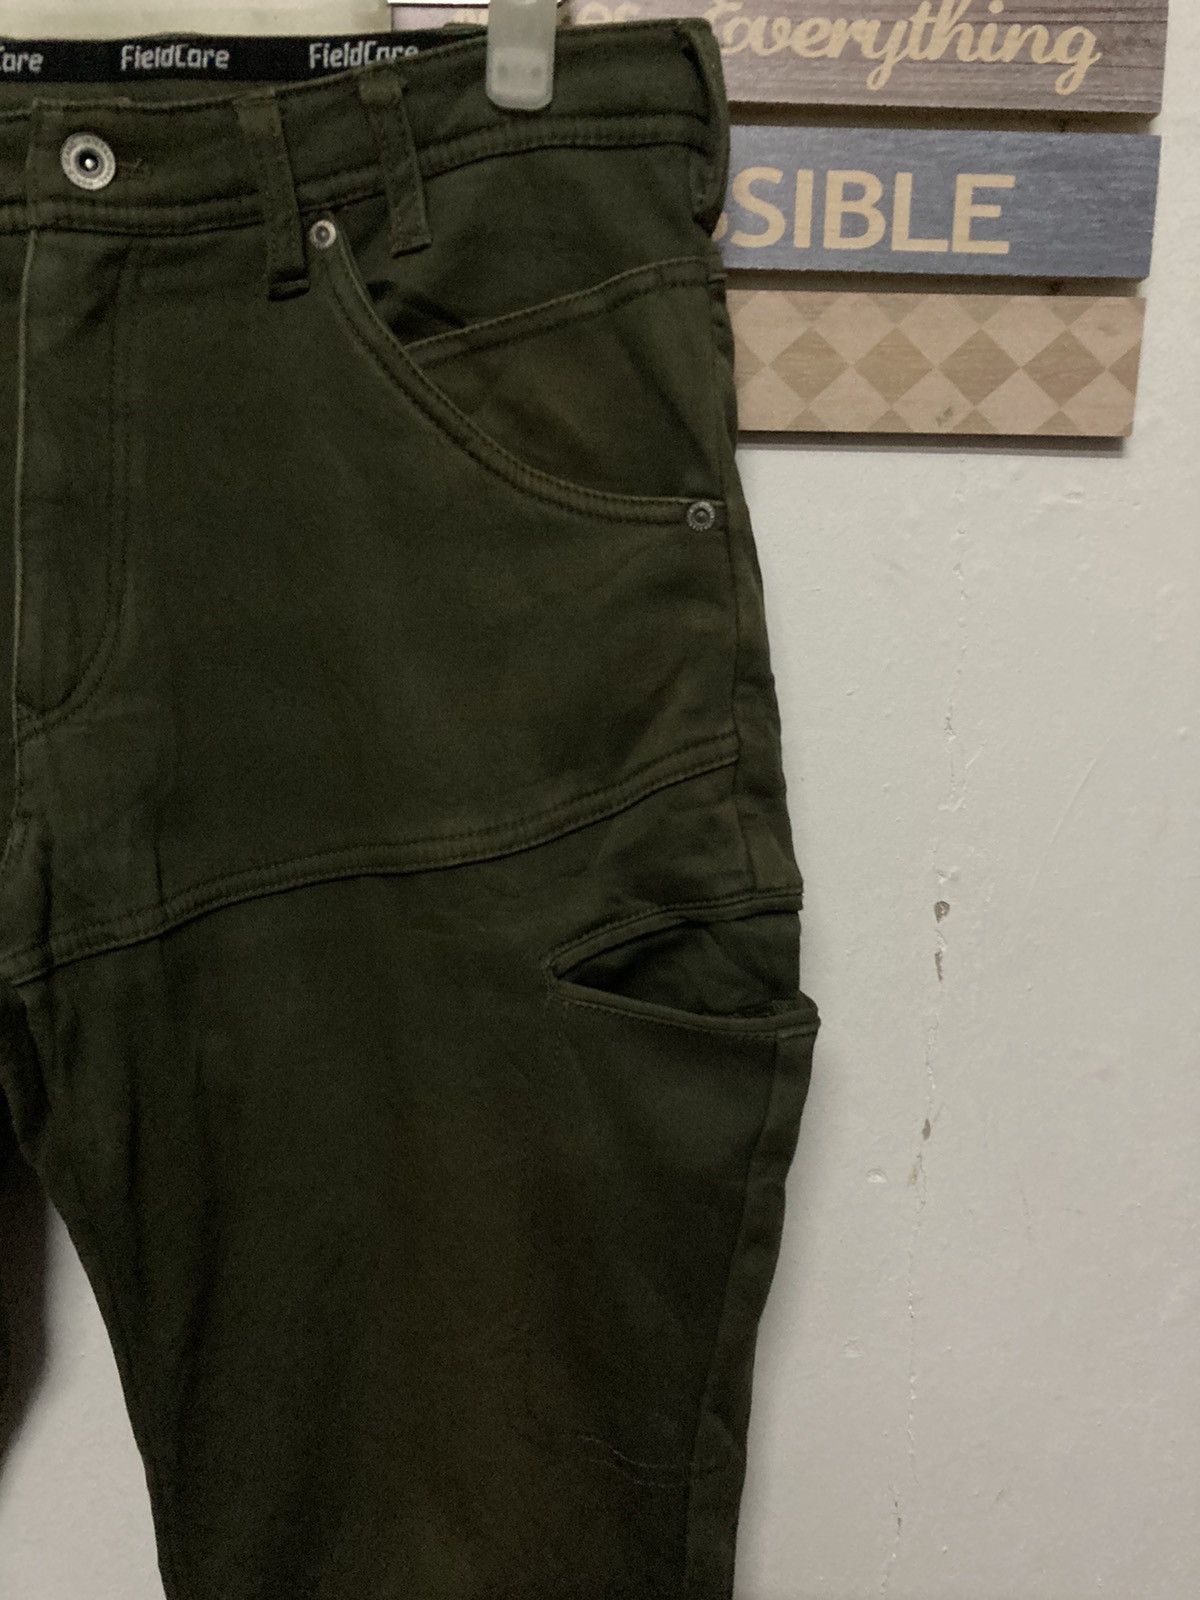 Vintage - Fieldcore Tactical Outdoor Thermal Pants - 7